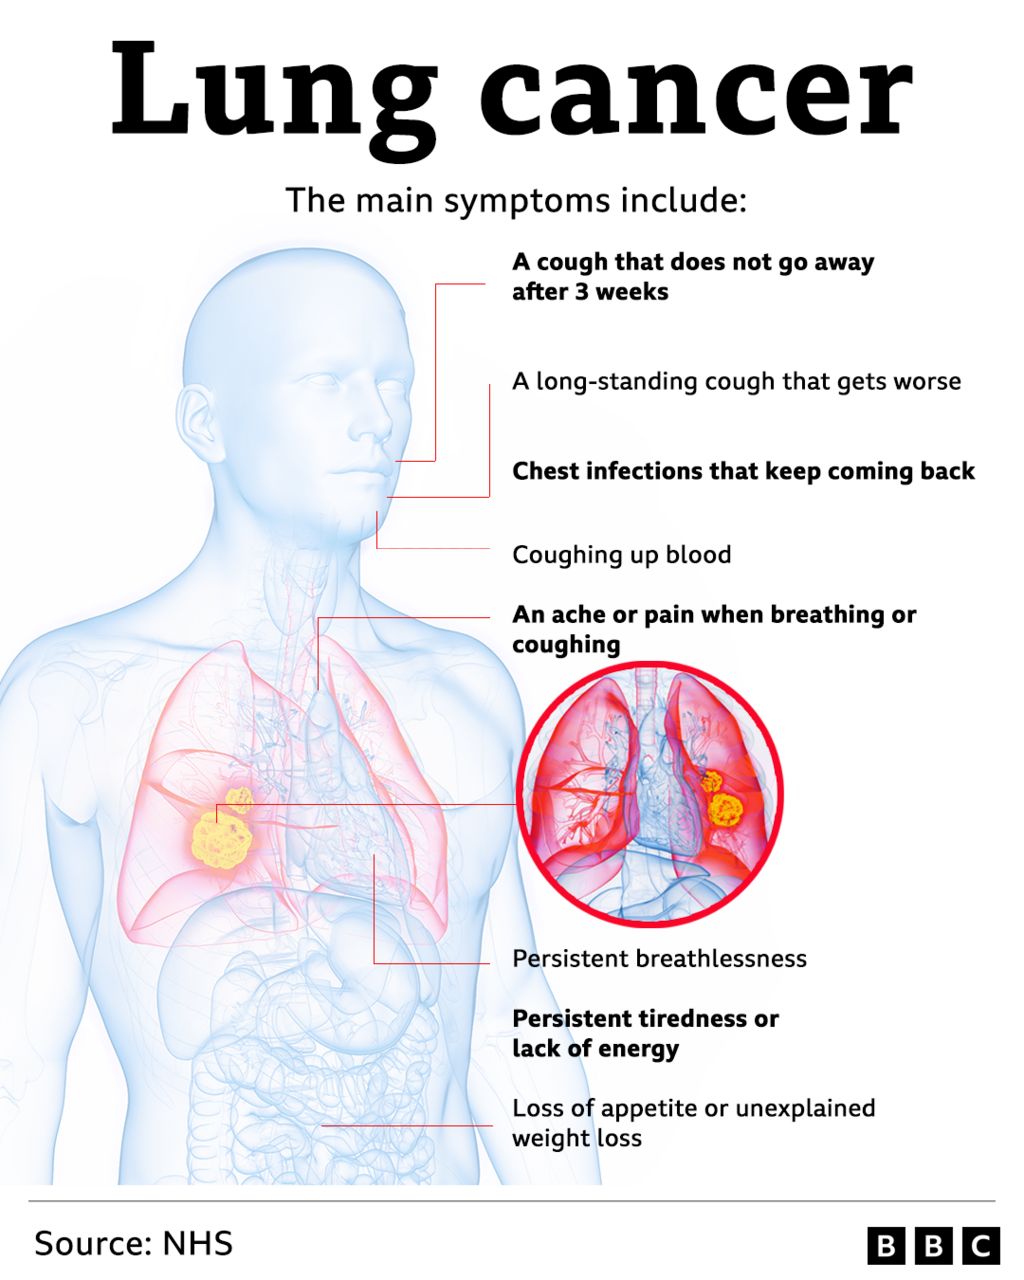 Graphic explains the symptoms of lung cancer including breathlessness, repeated chest infections, a cough that does not go away after 3 weeks